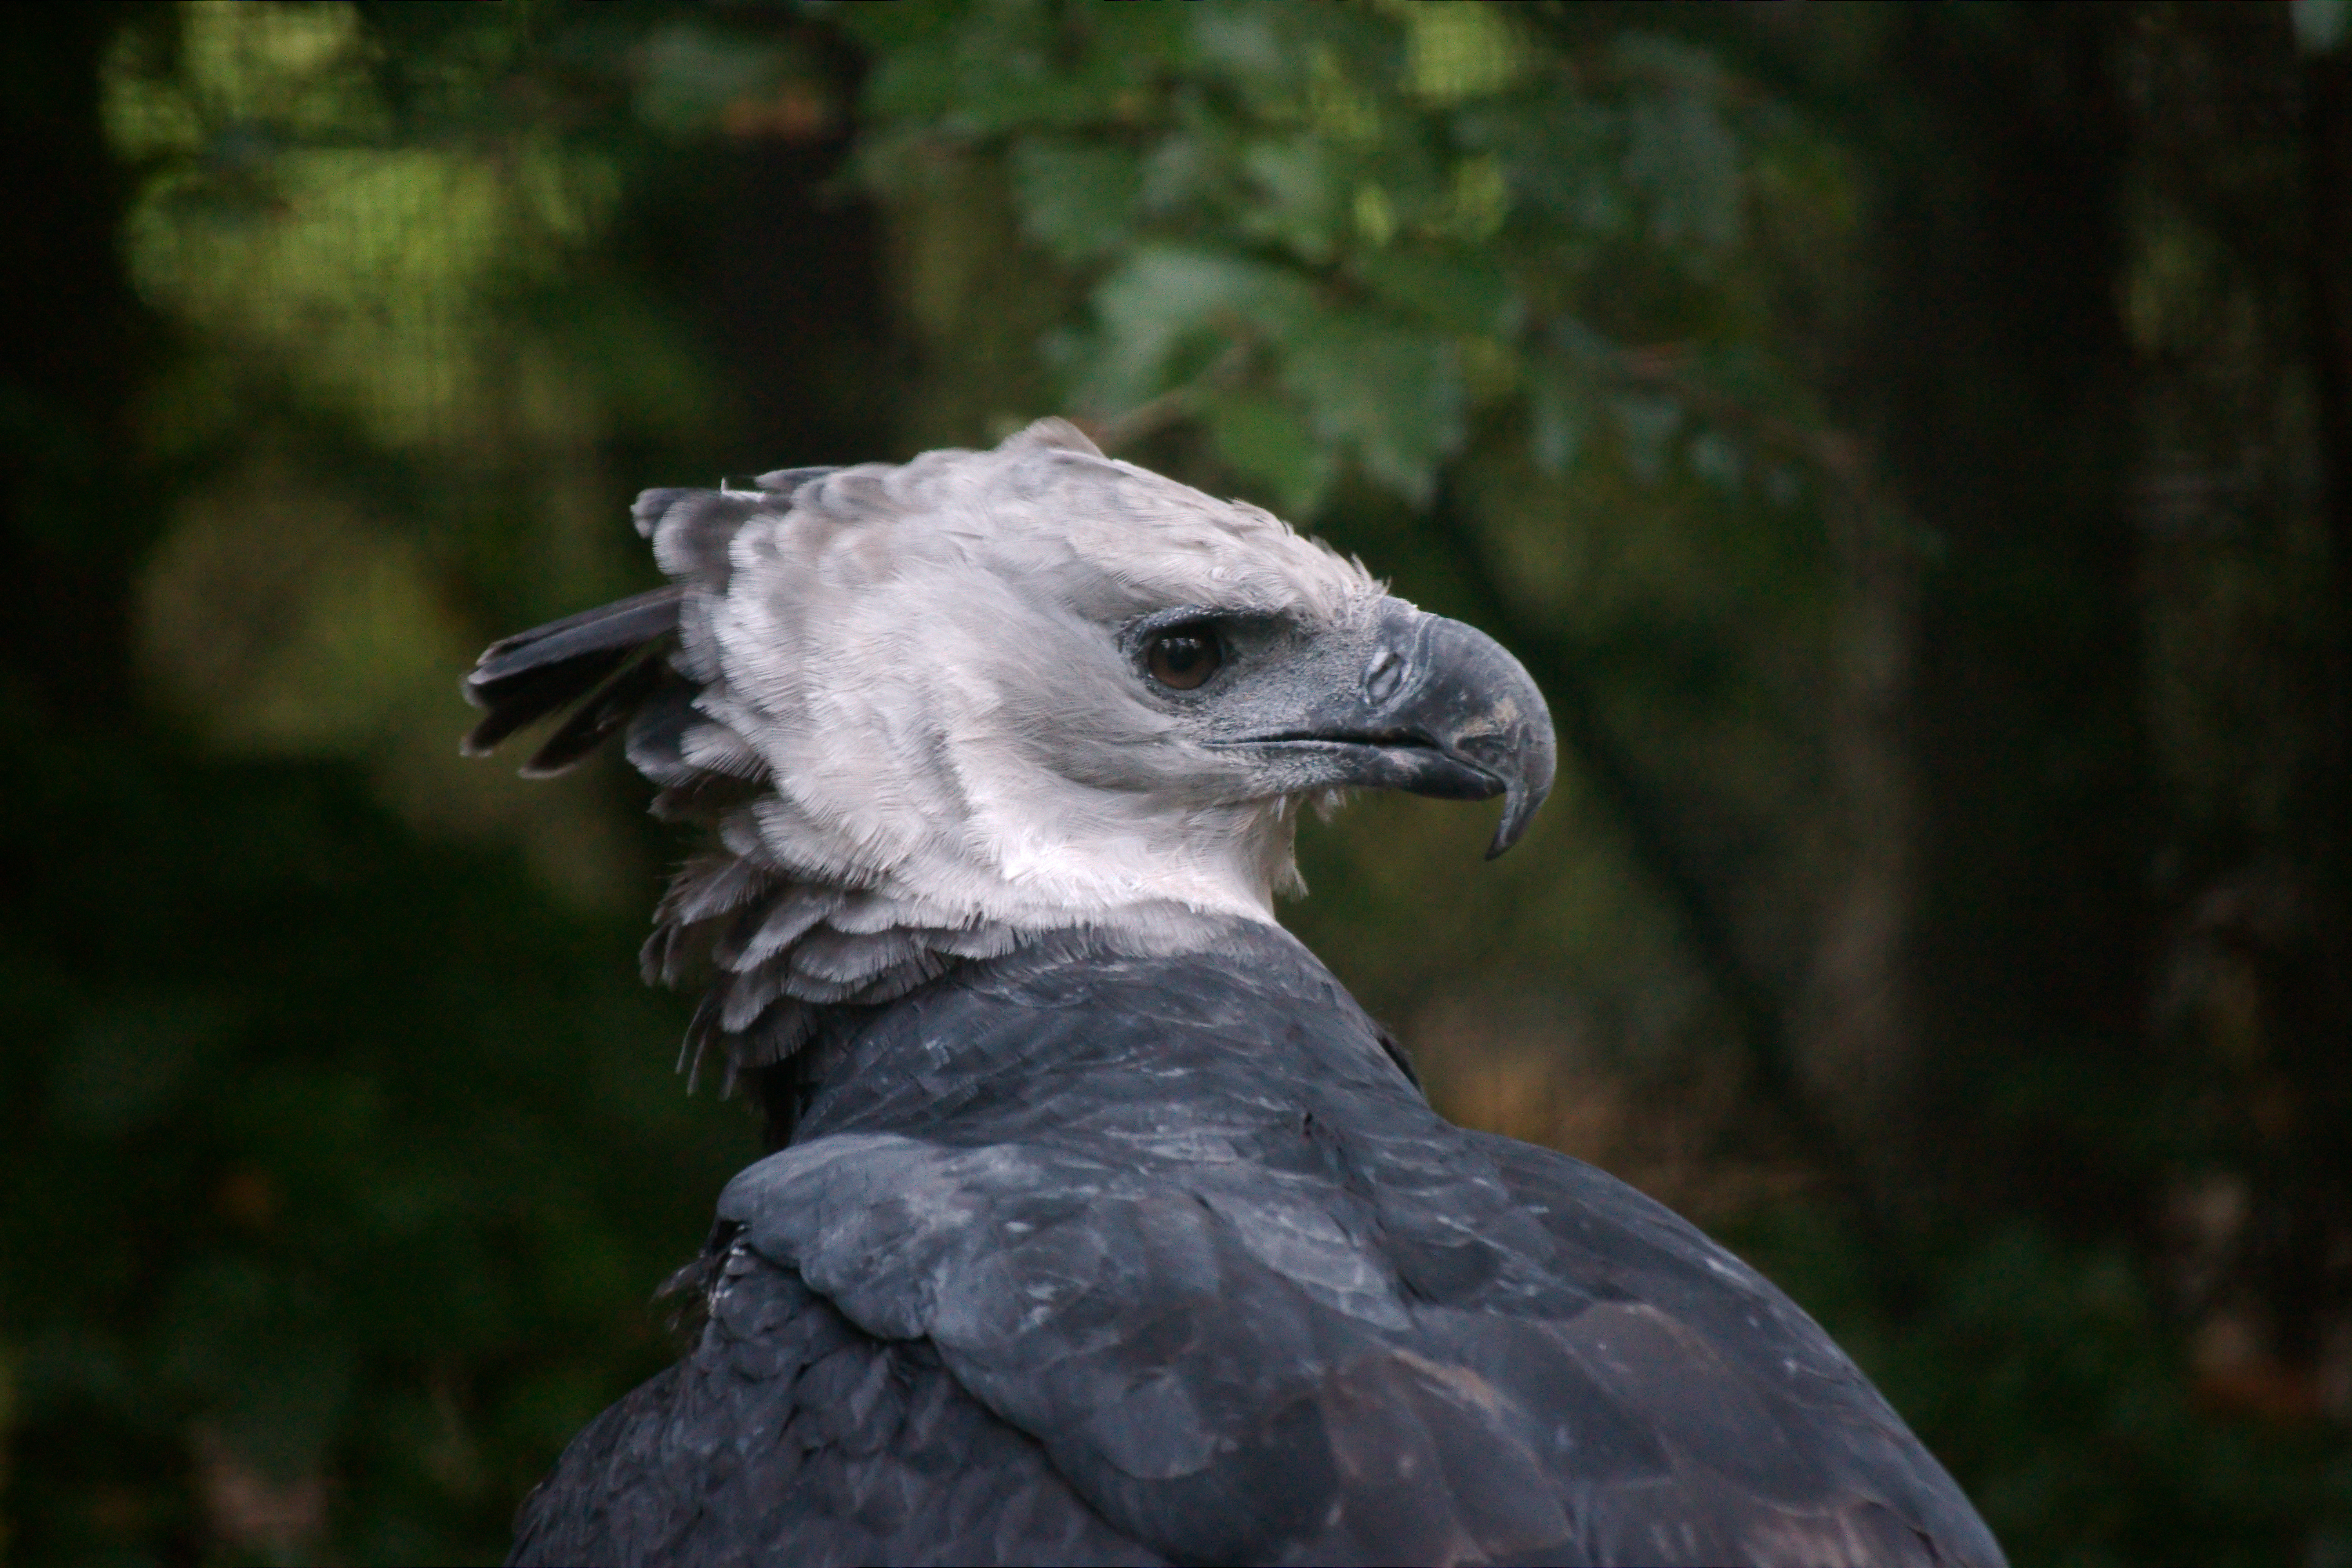 Side view of the Harpy Eagle. Photo taken by Andy Rogers, published on Flickr